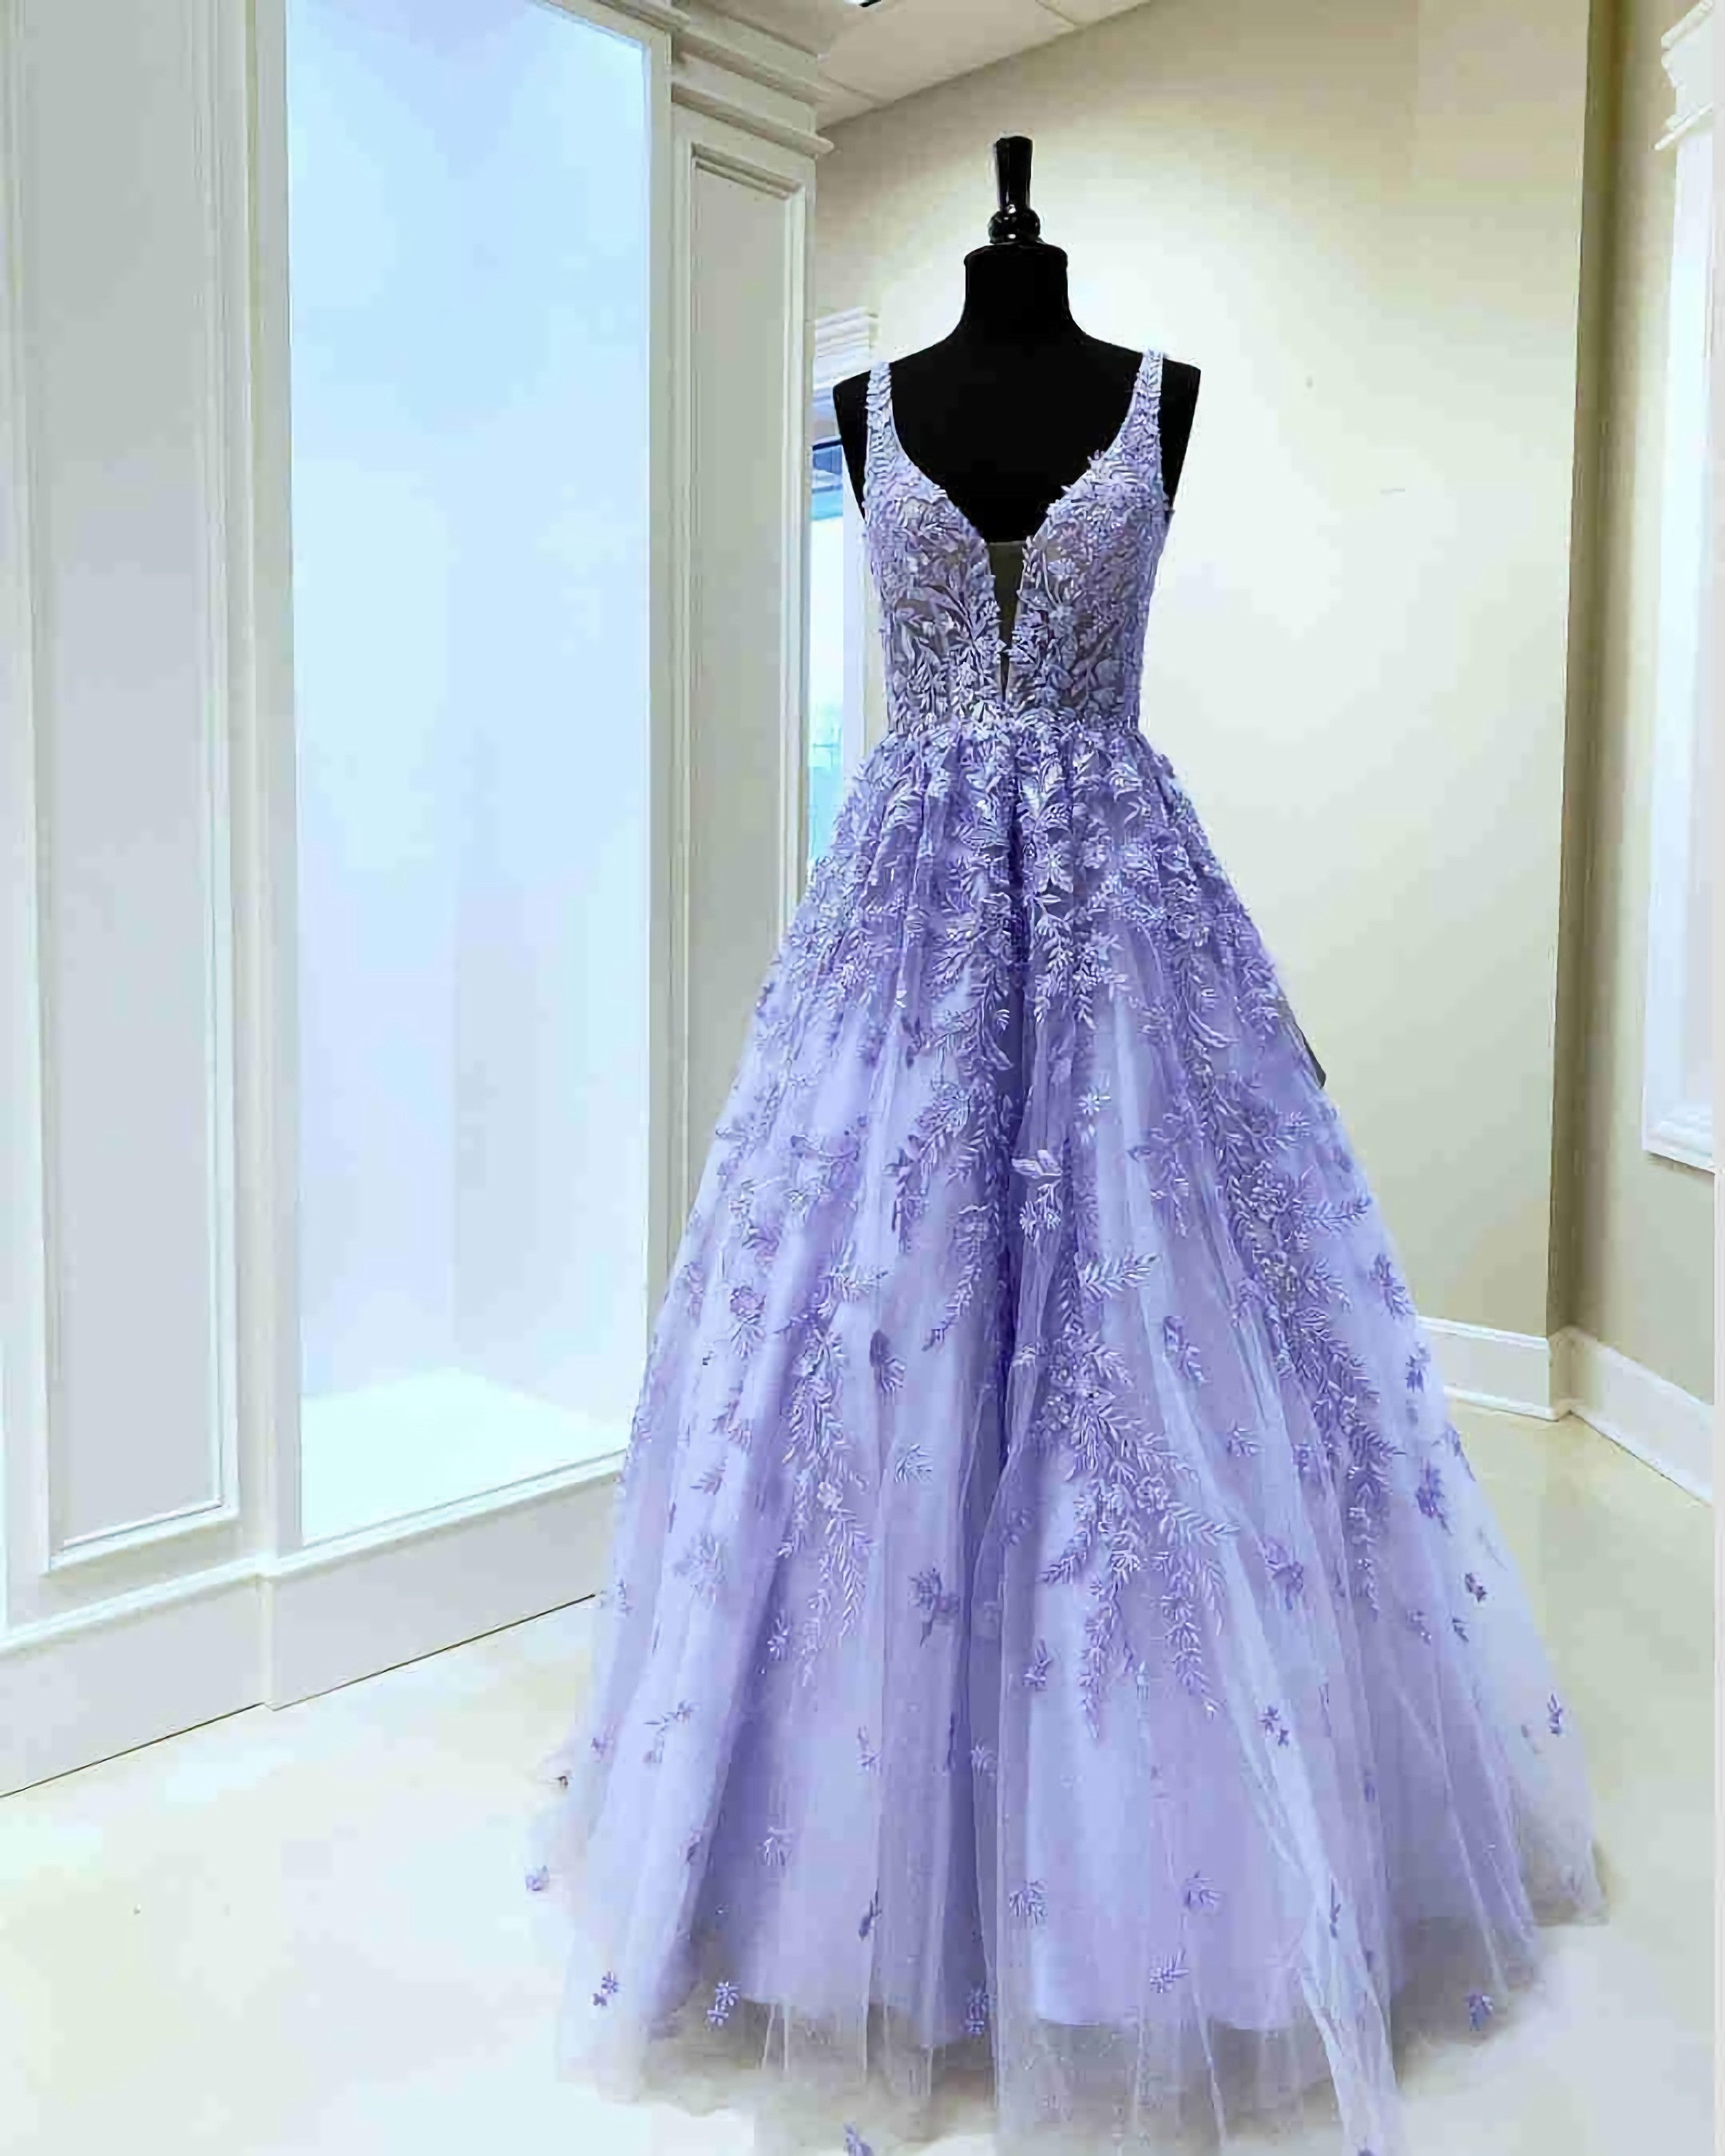 Gorgeous V Neck Embroidery Lavender Long Corset Prom Dress outfits, Evening Dress Classy